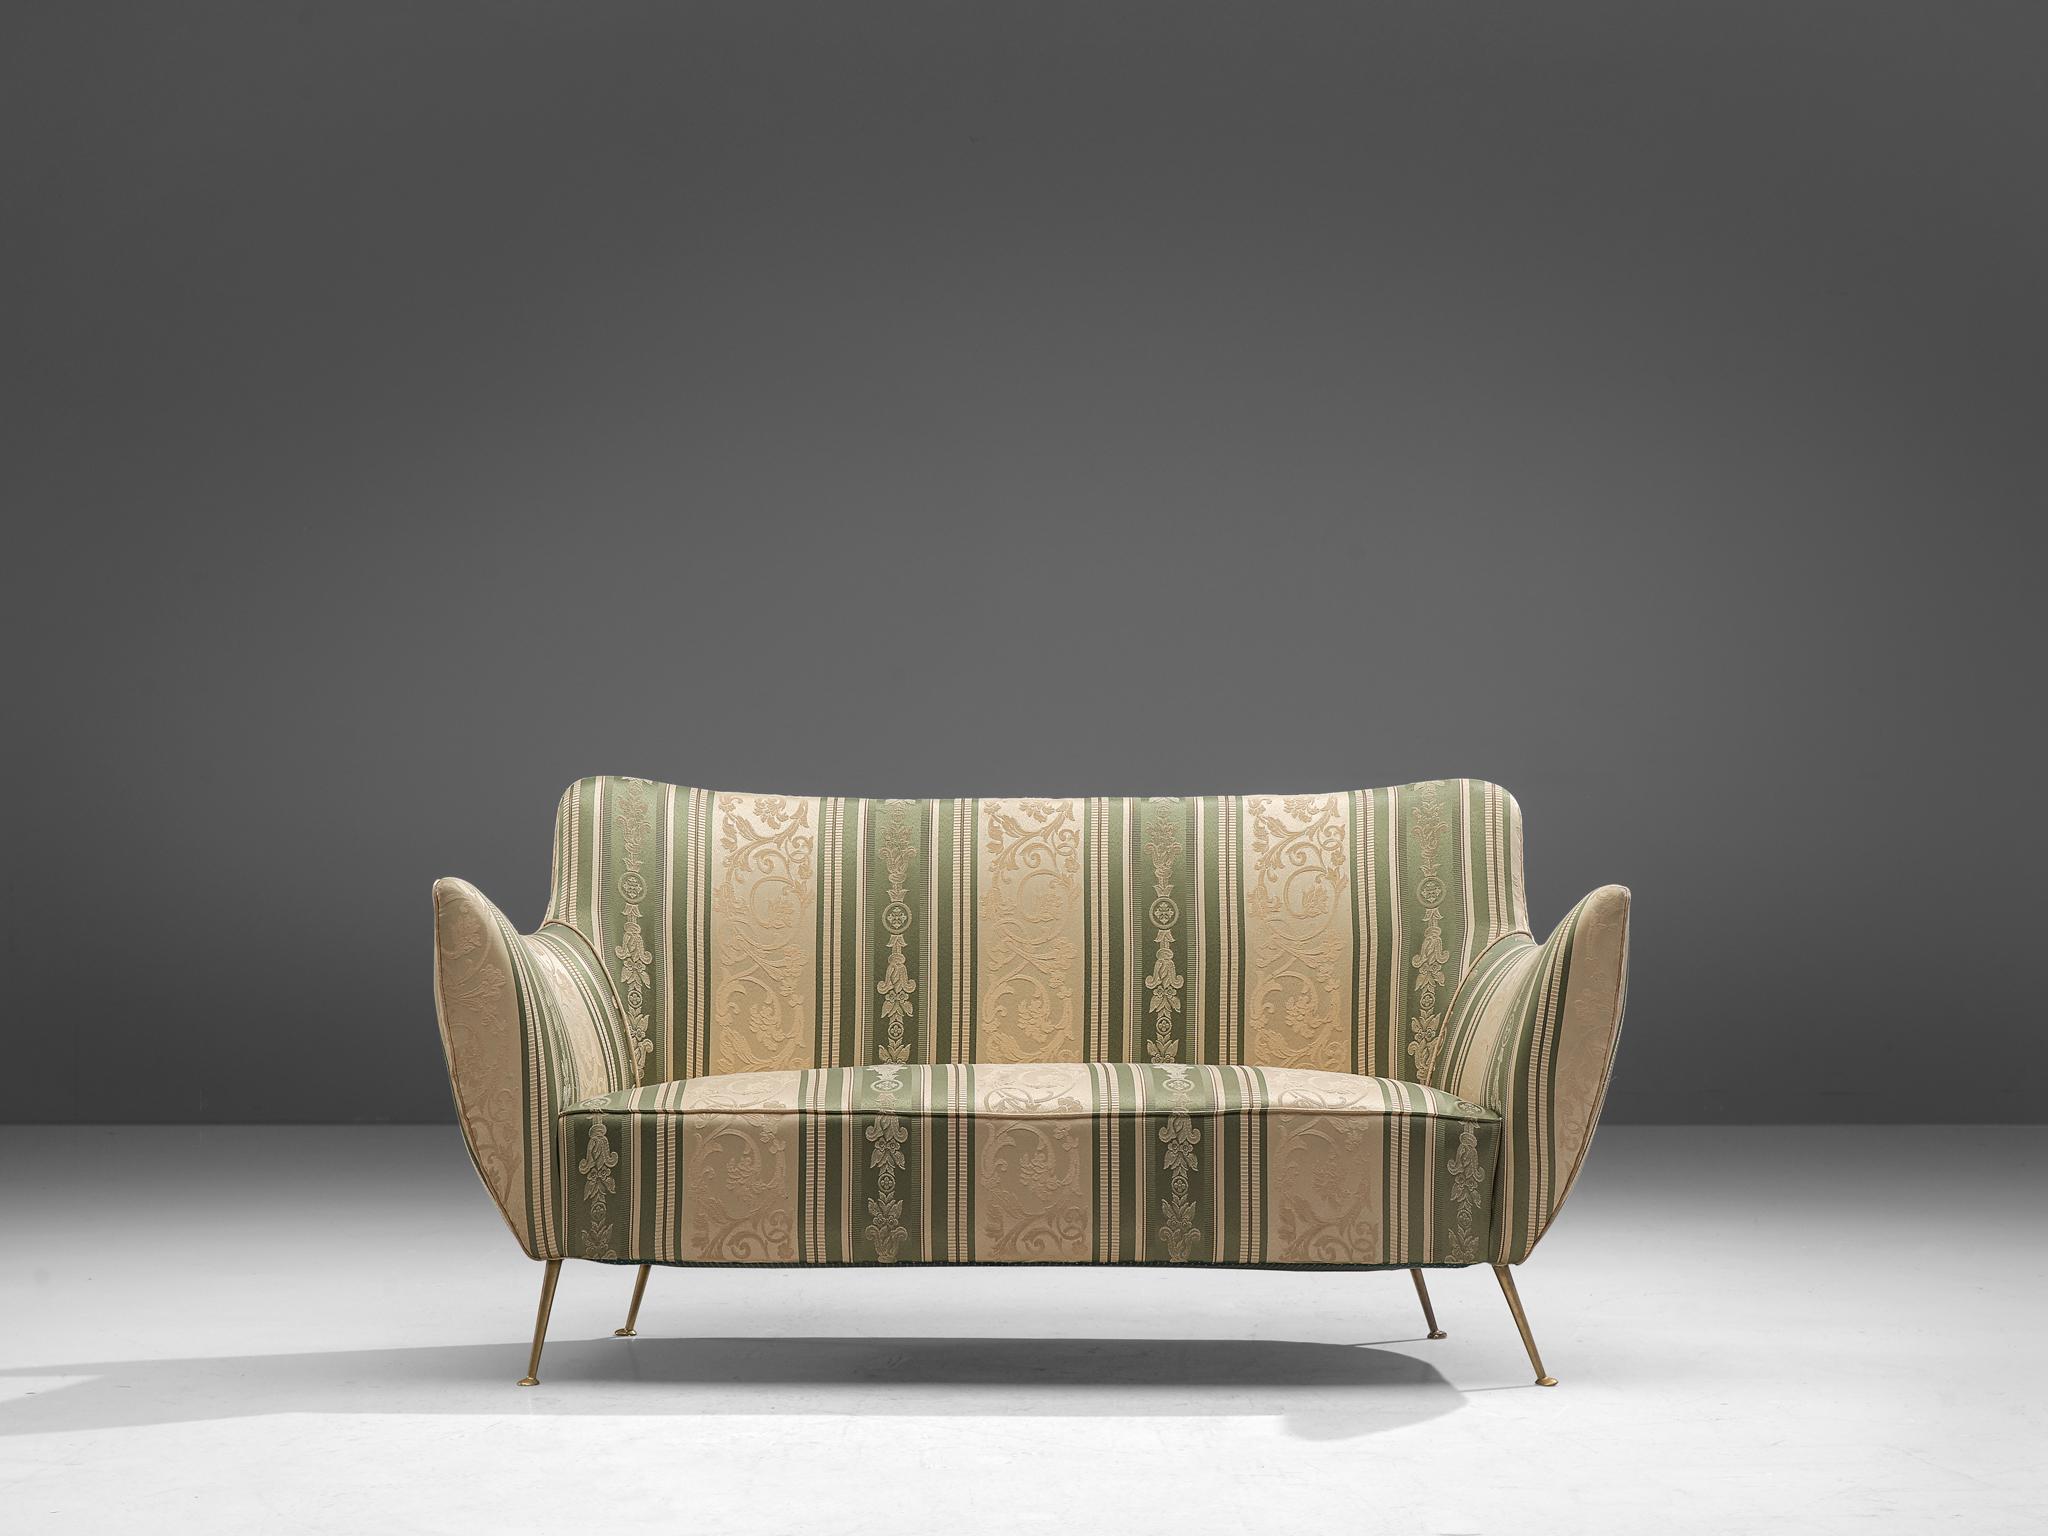 Guglielmo Veronesi for I.S.A Bergamo, sofa, brass, fabric, Italy, 1952.

This wingback sofa is an iconic example of Italian design from the fifties. Curvaceous, organic and sculptural, this two-seater sofa is anything but minimalistic. The small,